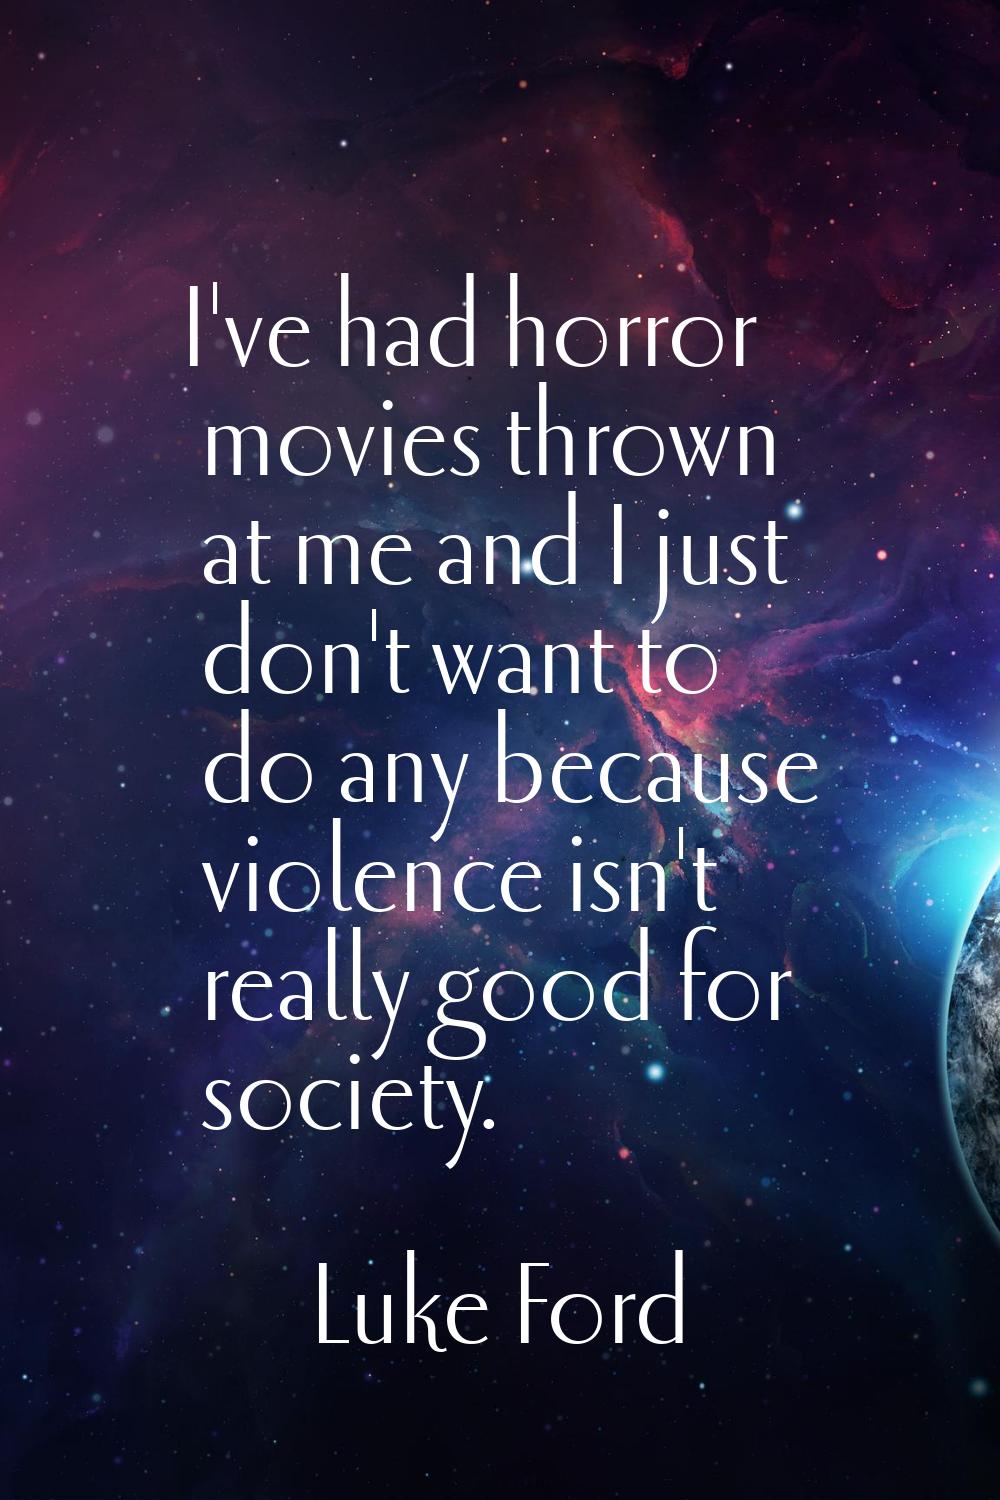 I've had horror movies thrown at me and I just don't want to do any because violence isn't really g